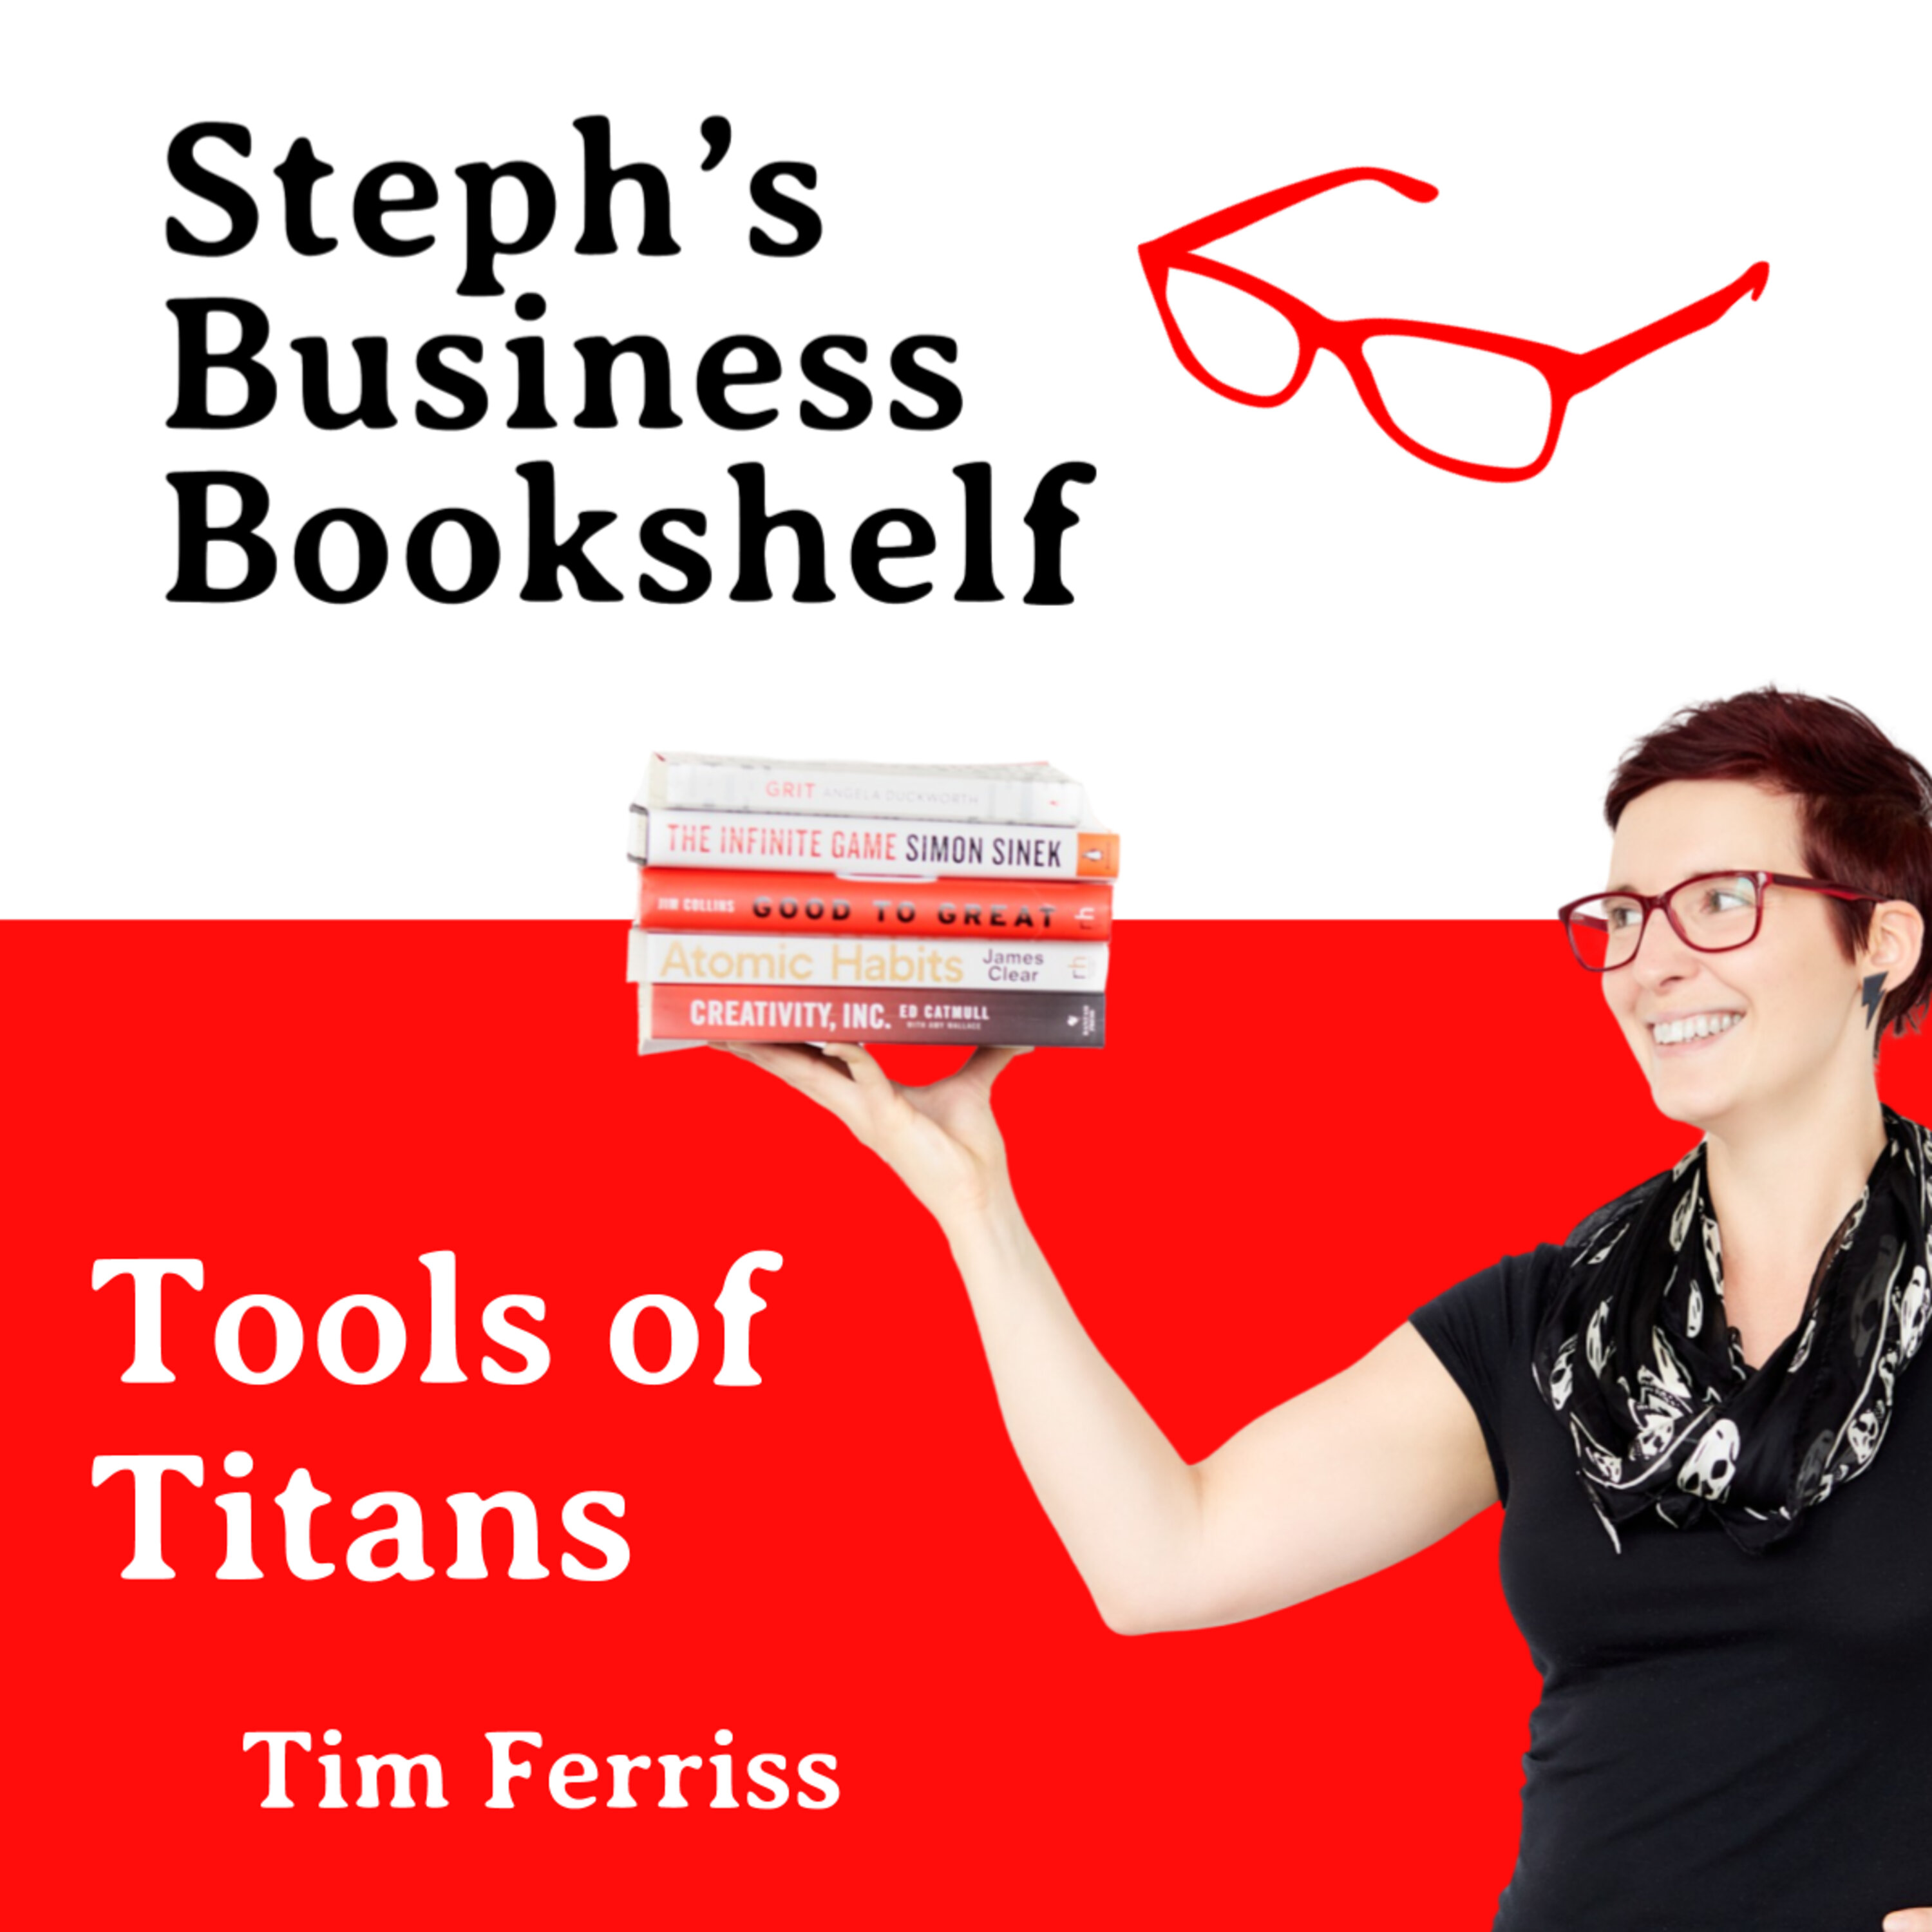 Tools of Titans by Tim Ferriss: how to make your habits your key for success